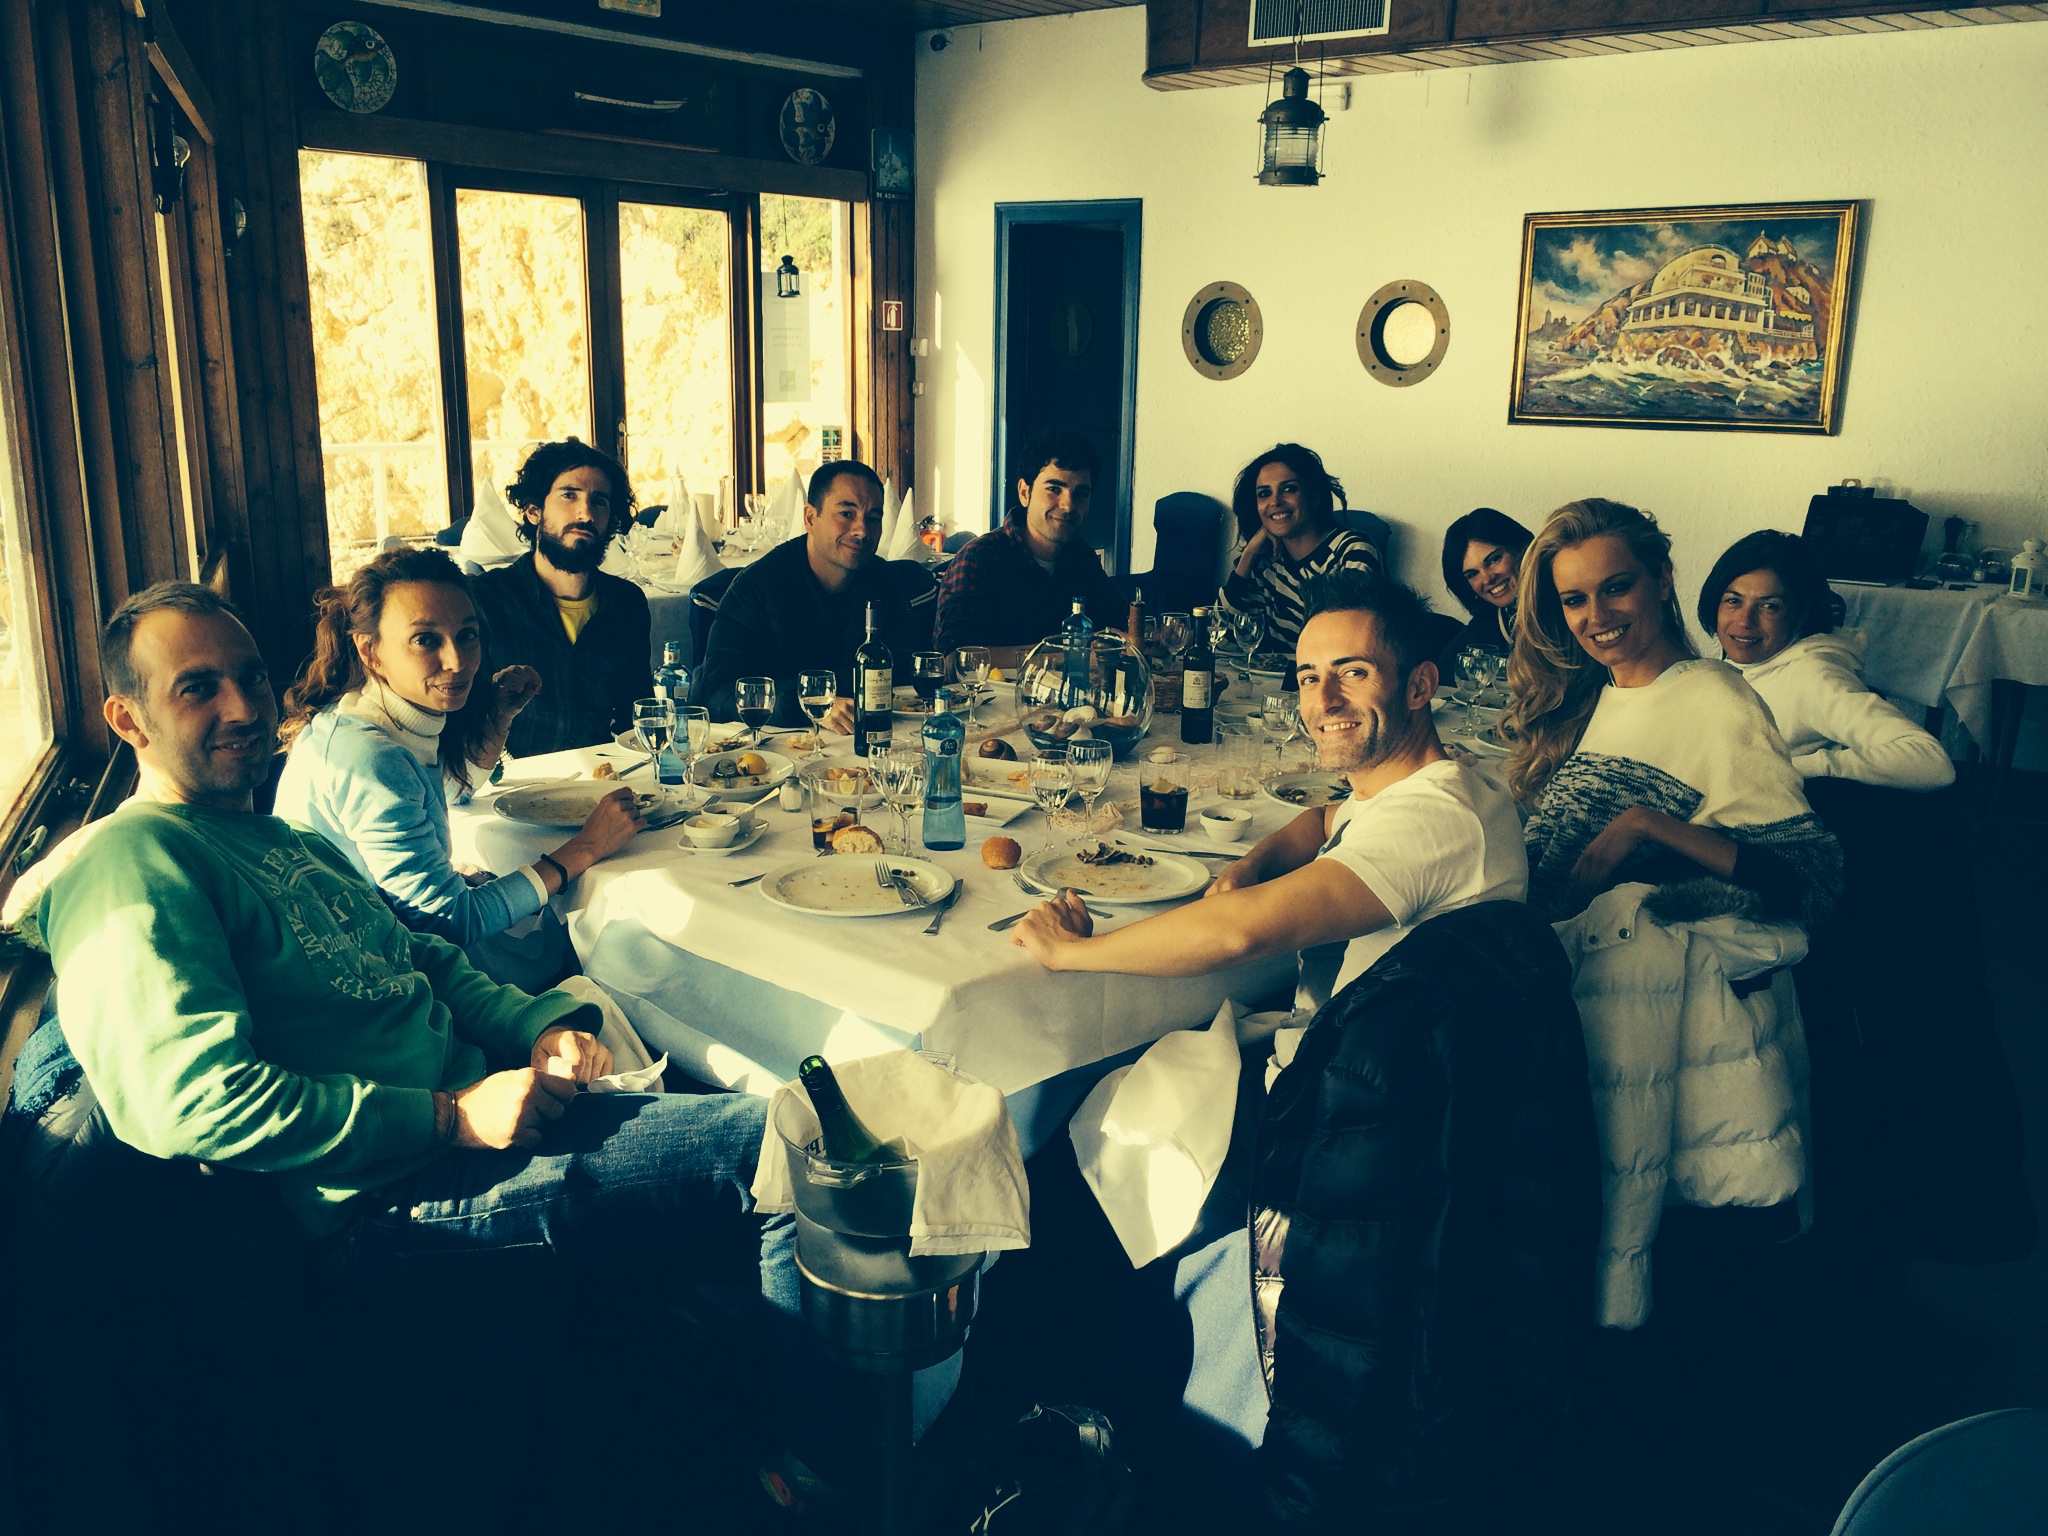 "And here the whole team! End of shoot Spanish lunch. #YES!"